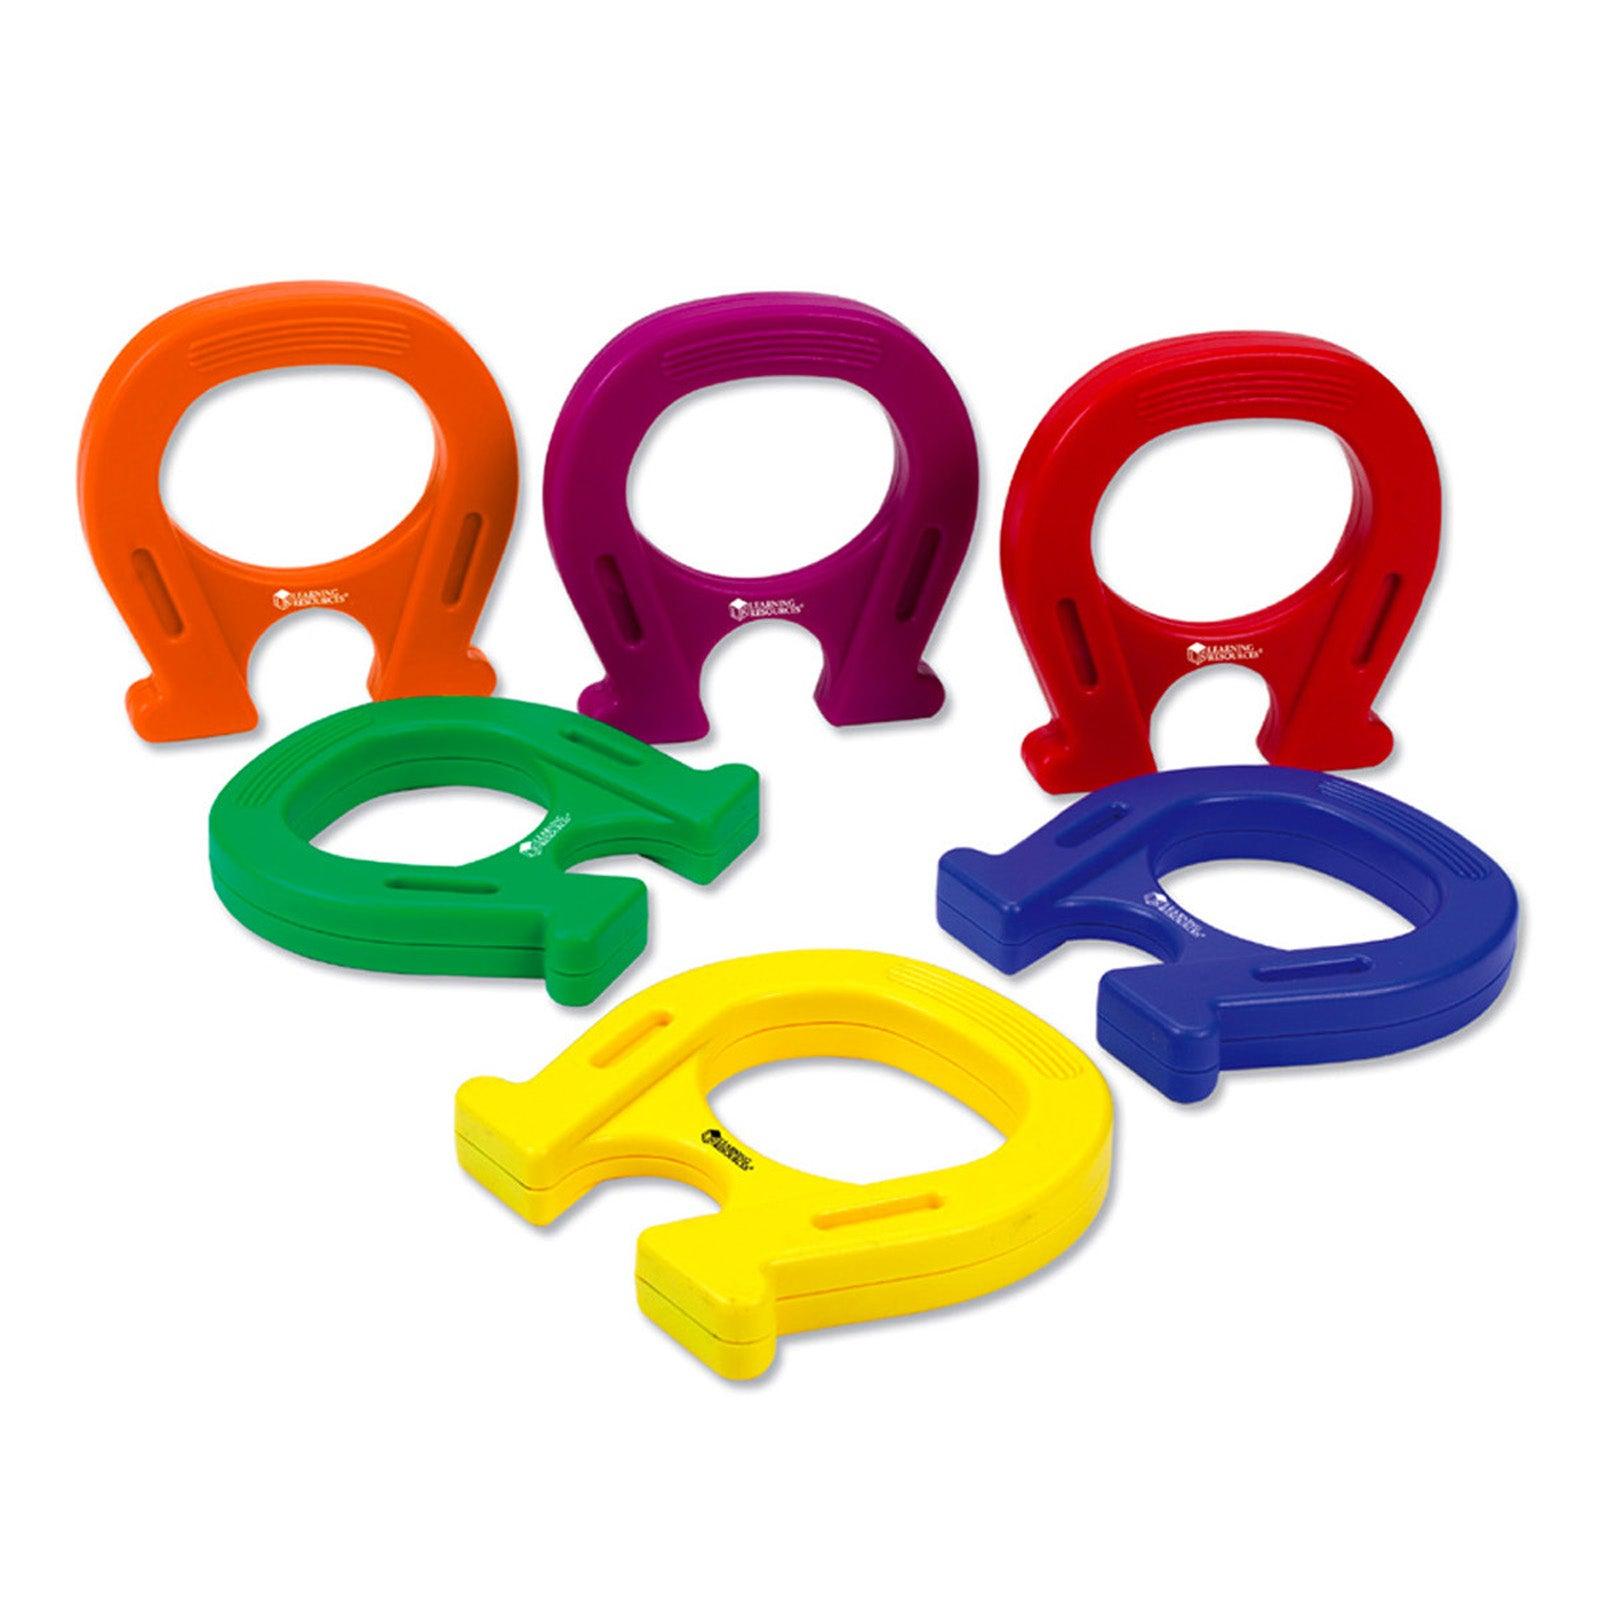 Primary Science 5" Mighty Magnets, Set of 6 - Loomini